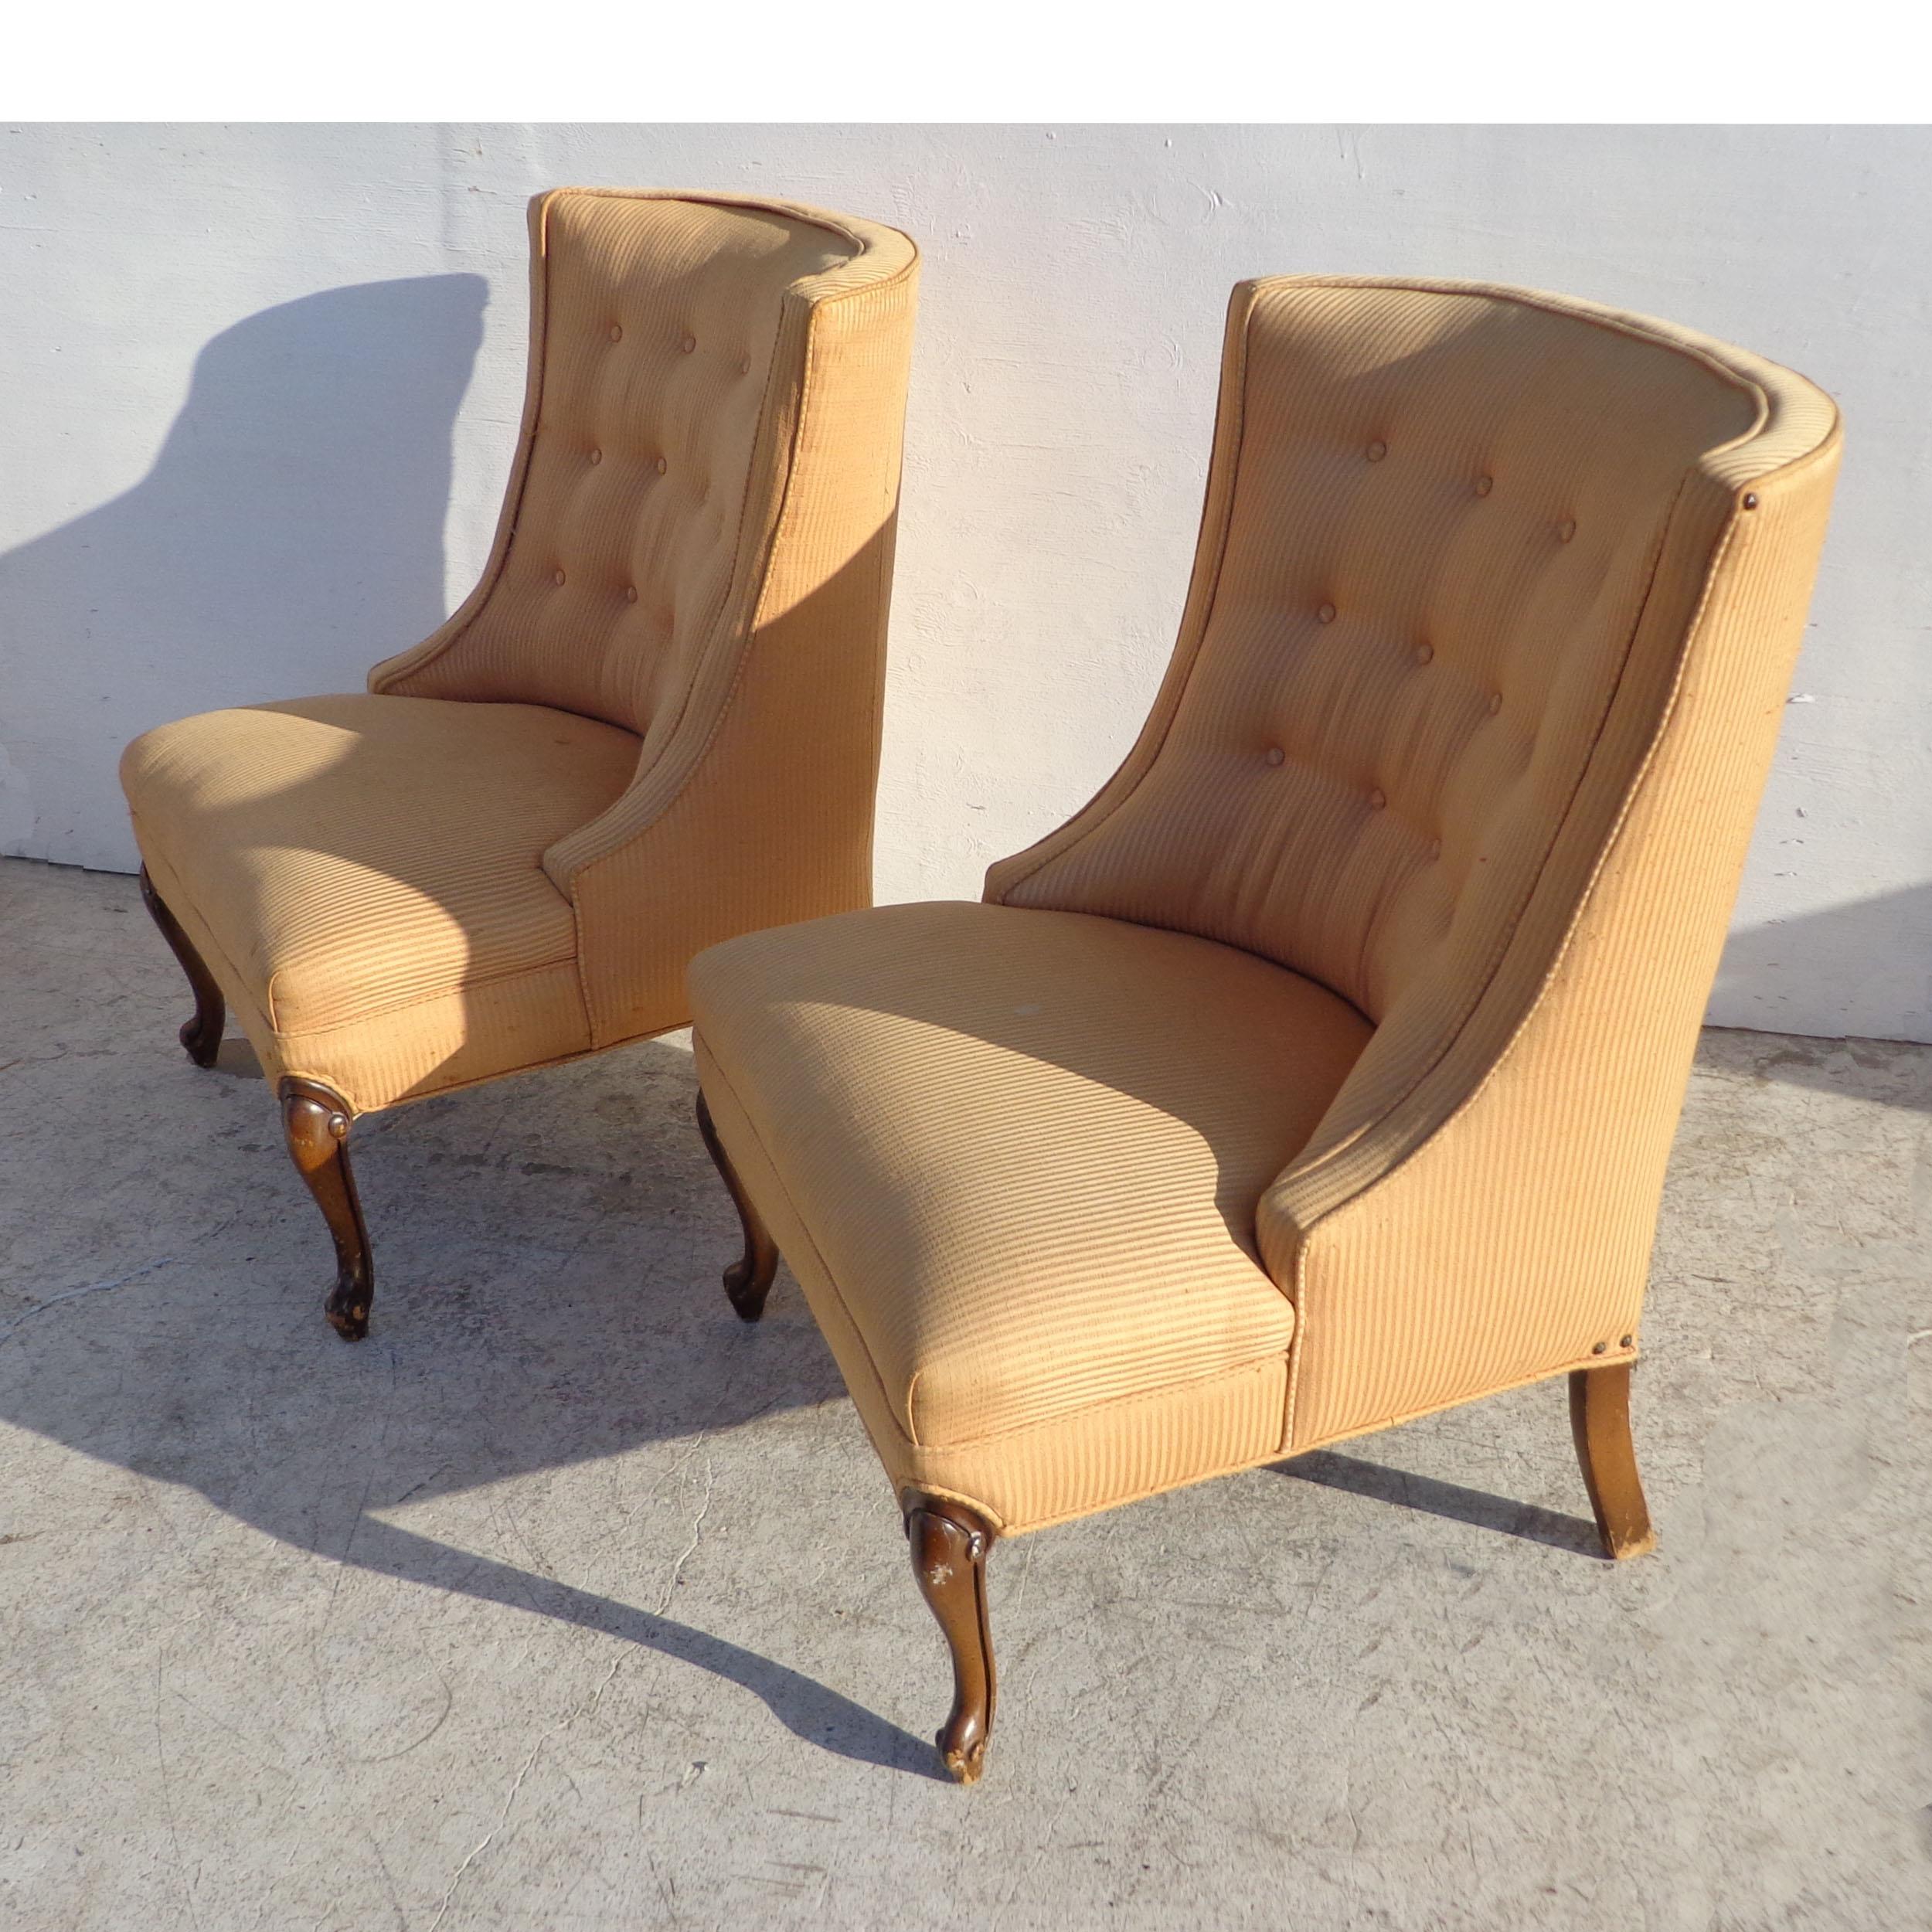 Pair of Hollywood Regency button tufted slipper chairs

 Can we cut right chair out ; copy and flip so no shadow?


Regency style chairs with button tufted backs. Cabriole Queen Anne legs.
Measures: 29? Width x 25? Depth x 34.5? Height
Seat